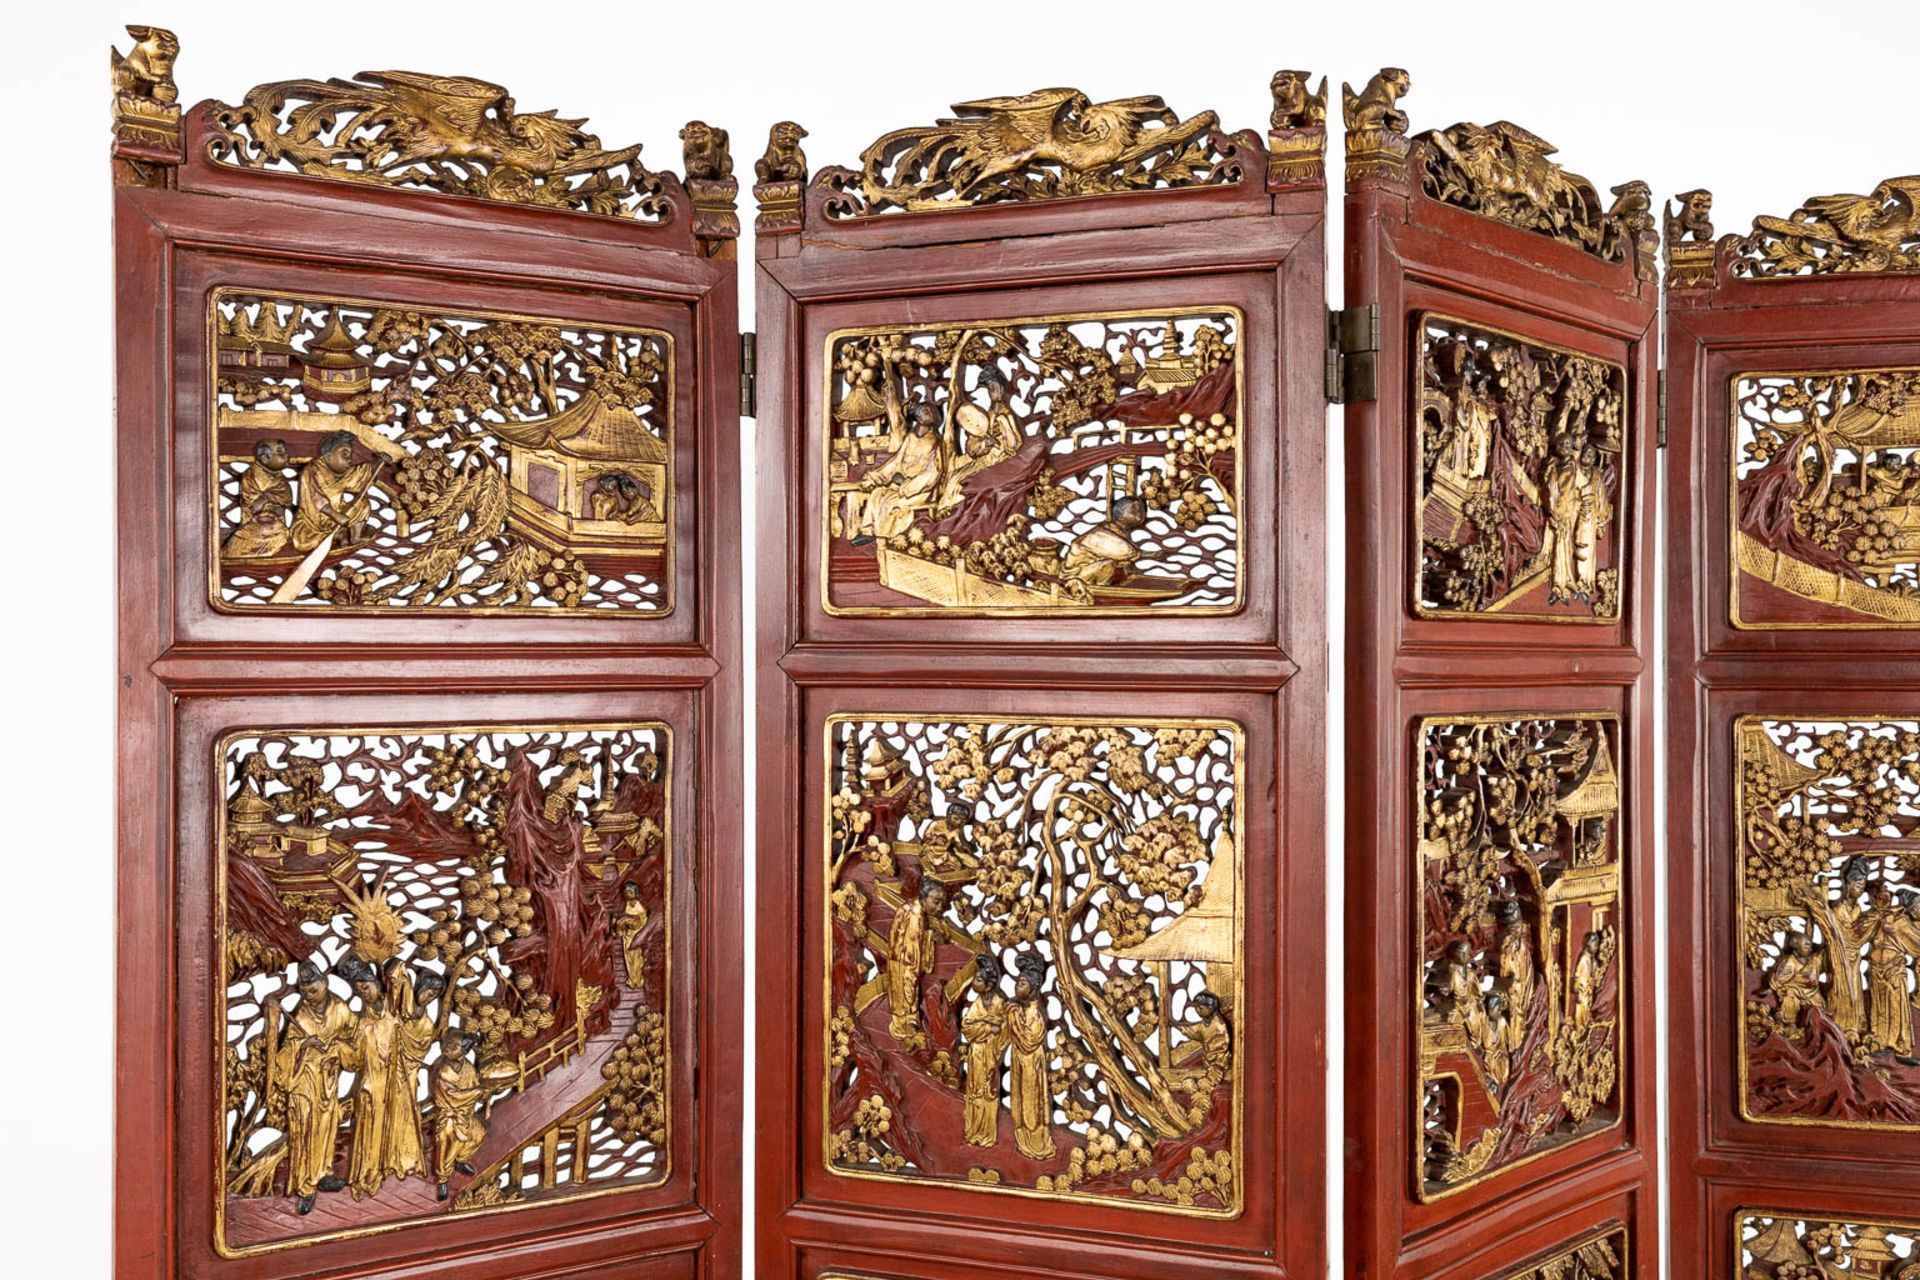 A 4-piece Chinese room divider, sculptured hardwood panels, circa 1900. (W:162 x H:185 cm) - Image 3 of 12